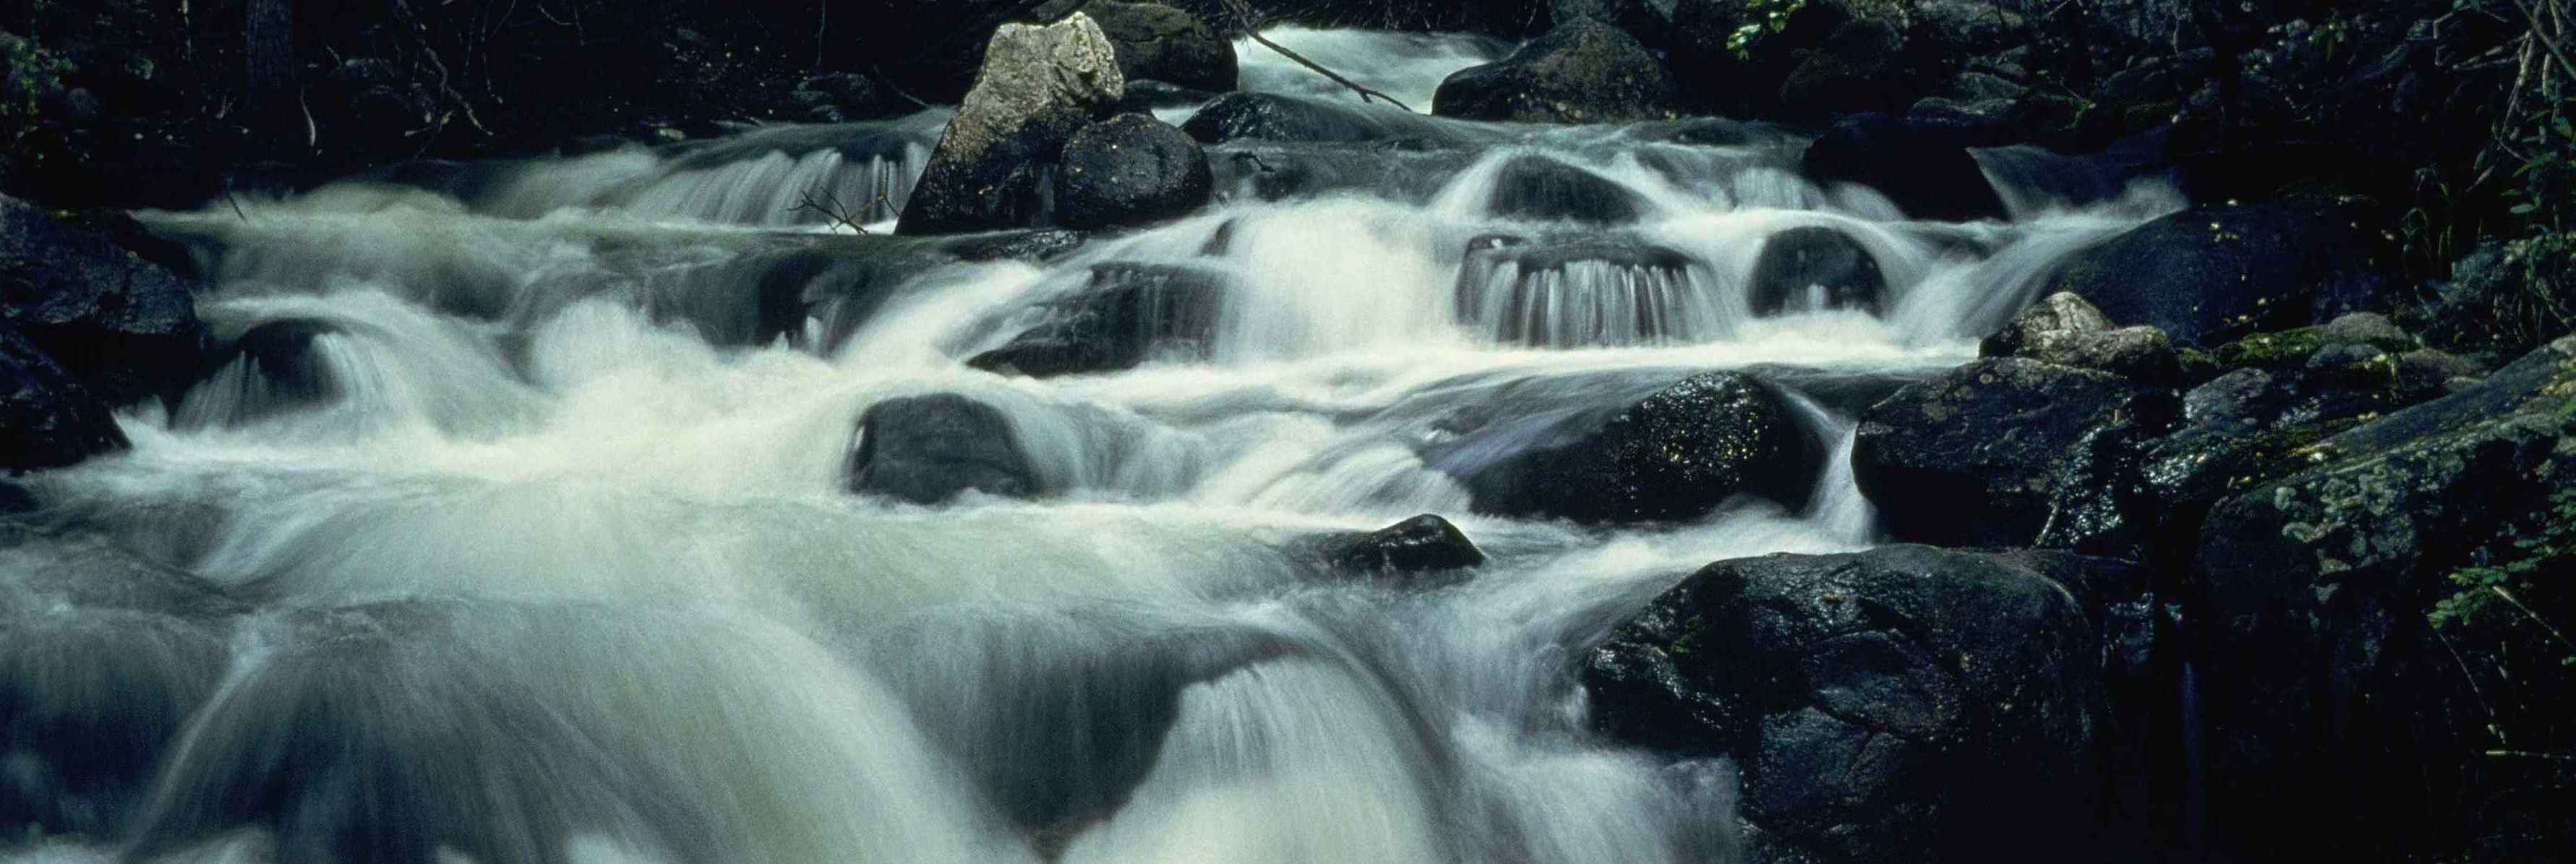 Fast mountain river makes a hazy waterfall / Public Domain